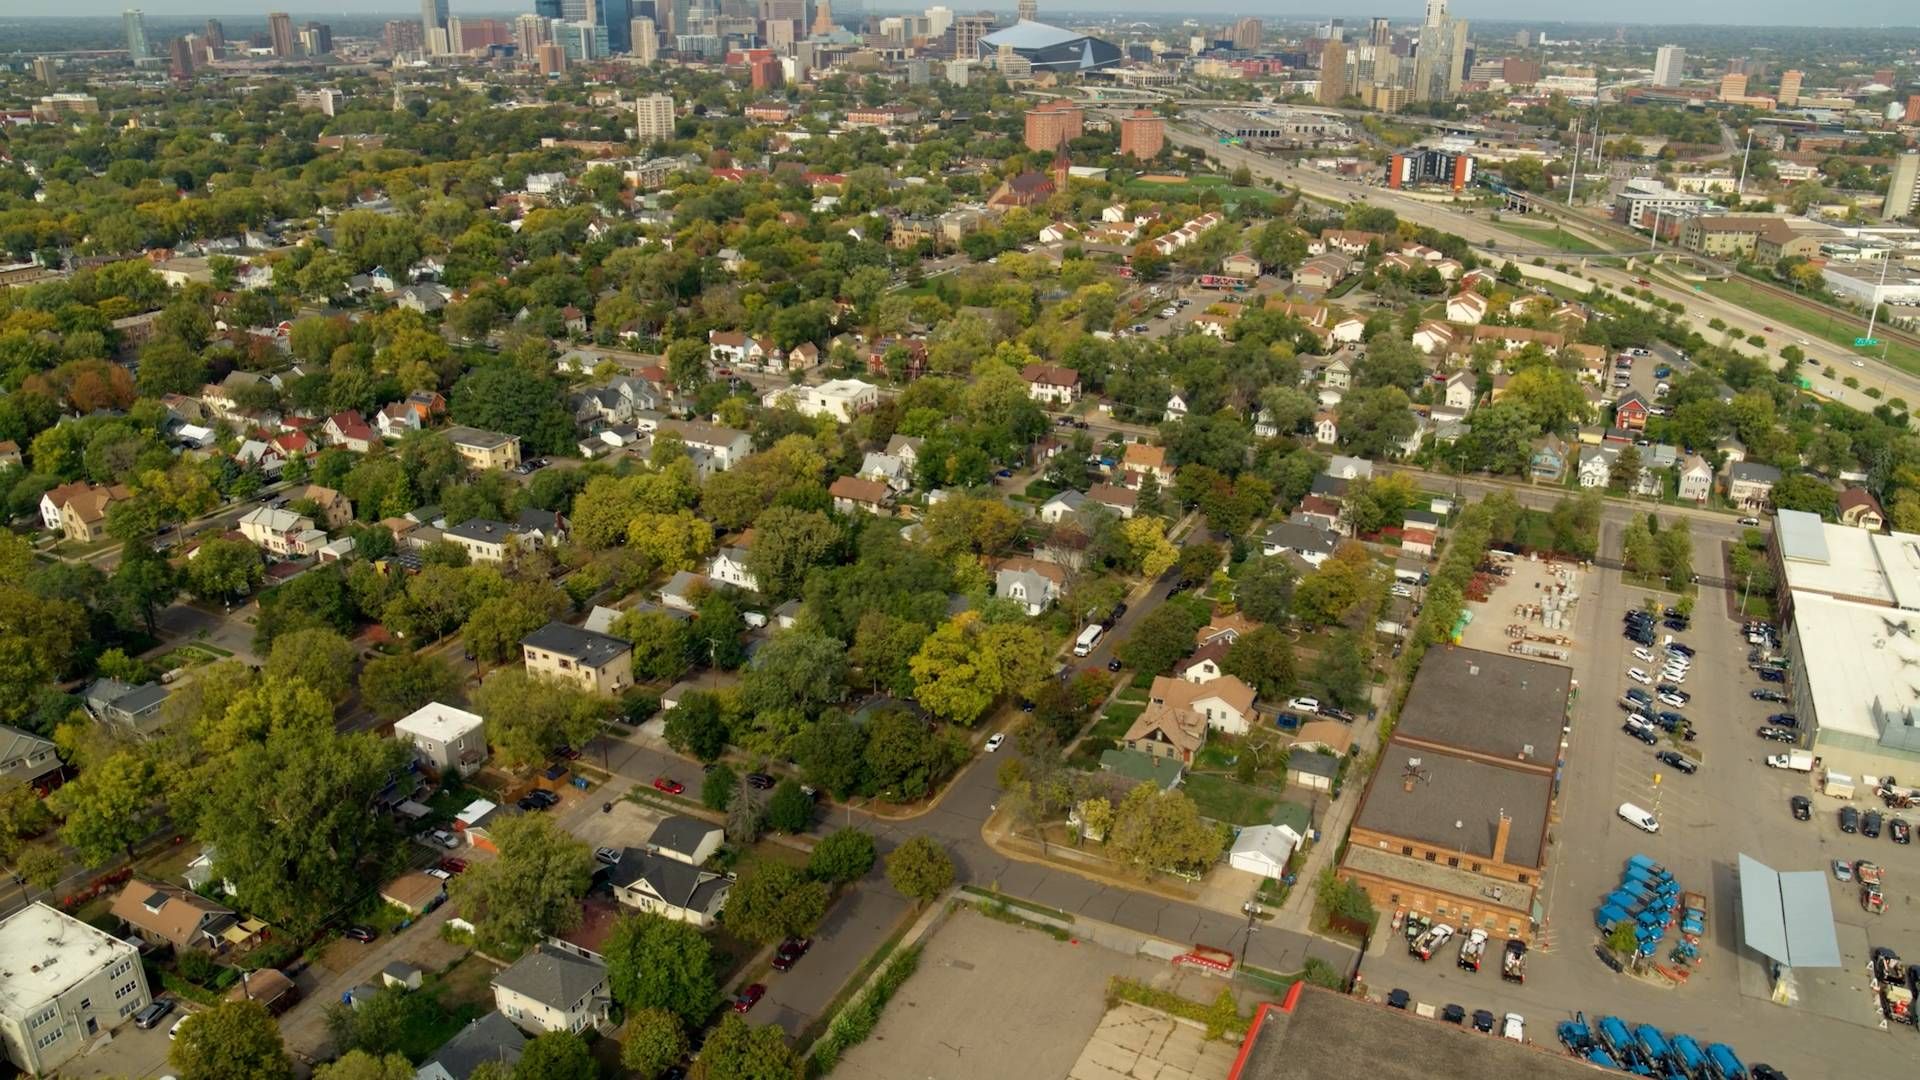 Aerial photo of East Phillips neighborhood with former pesticide plant